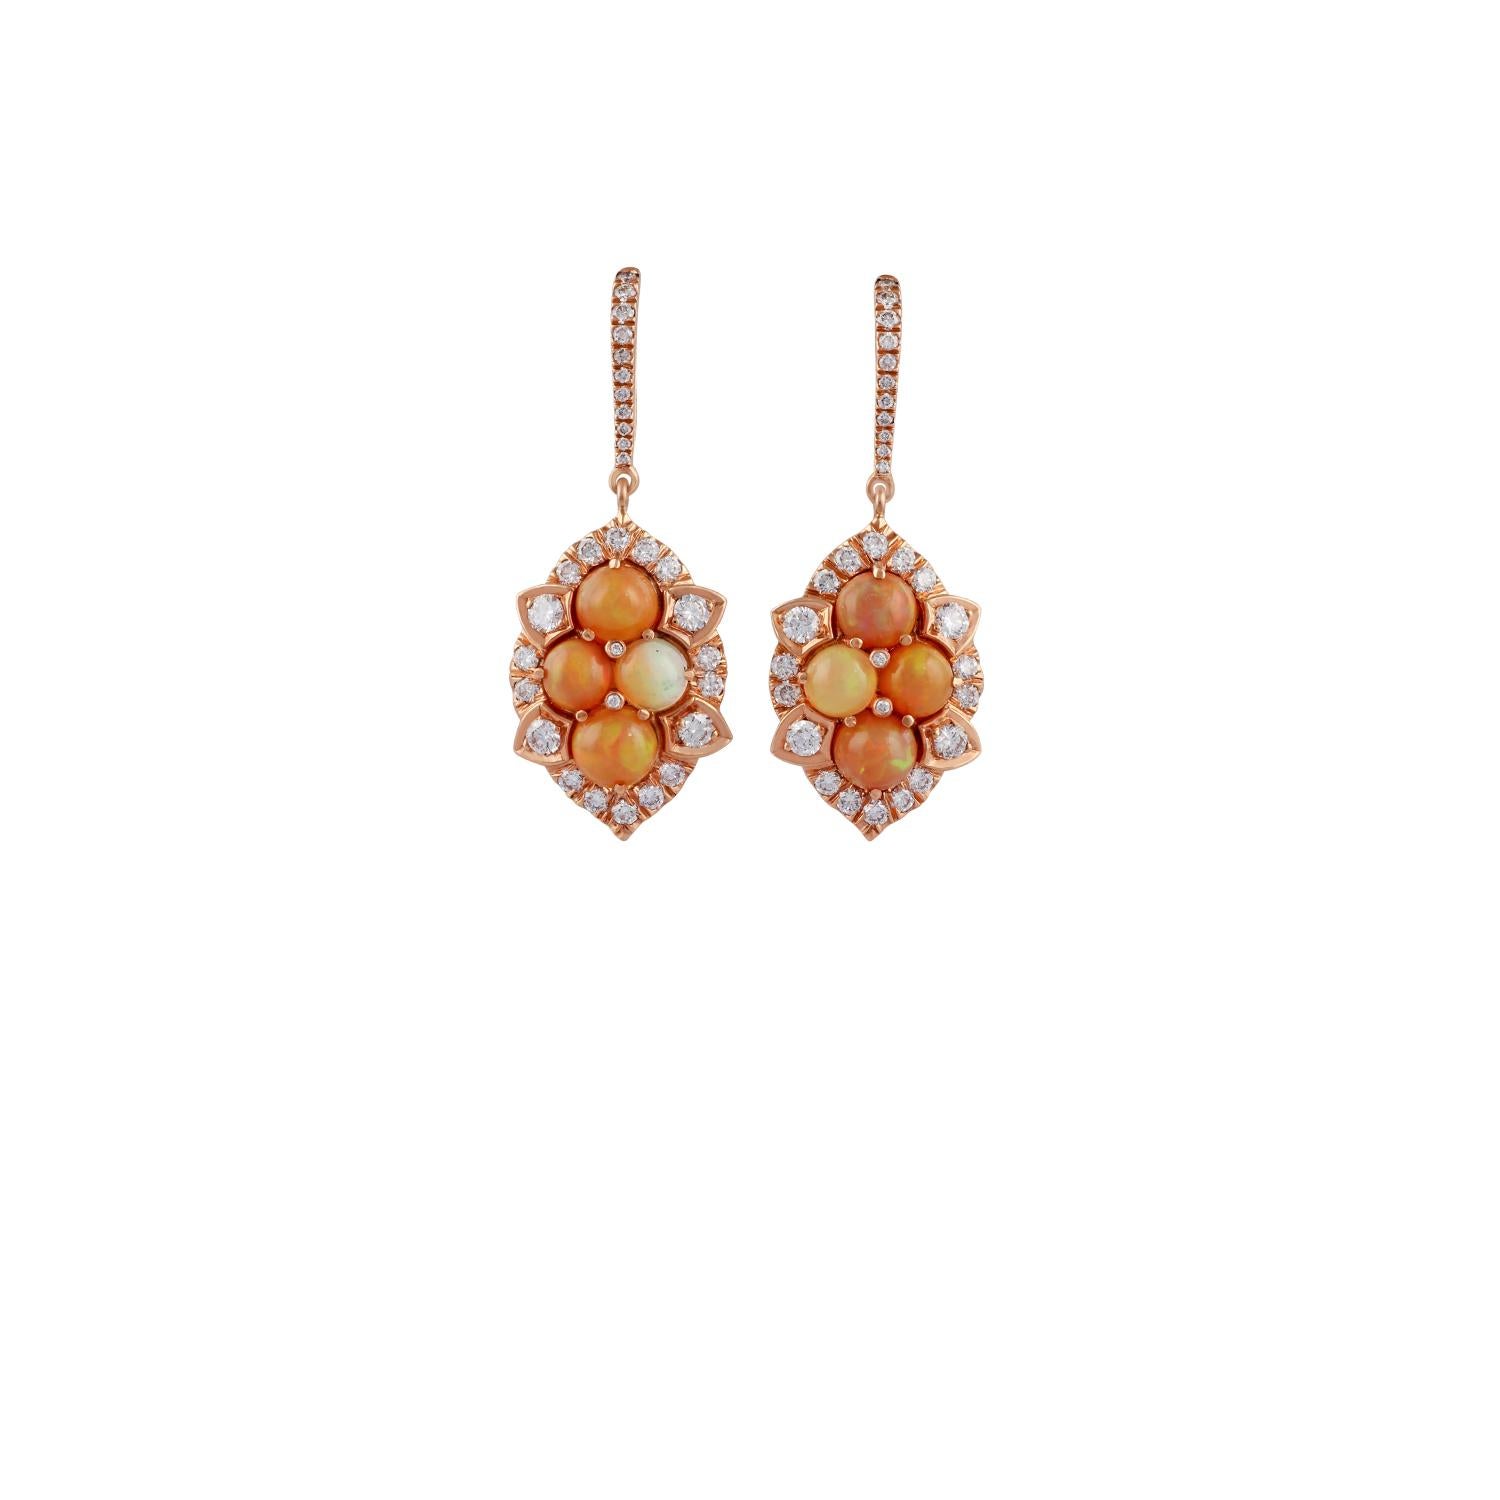 These are an exclusive opal & diamond earrings studded in 18k rose gold features 8 pieces of cabochon shaped opal weight 3.13 carat with 62 pieces of round shaped diamonds weight 1.53 carat, this entire earring pair is made of 18k rose gold weight